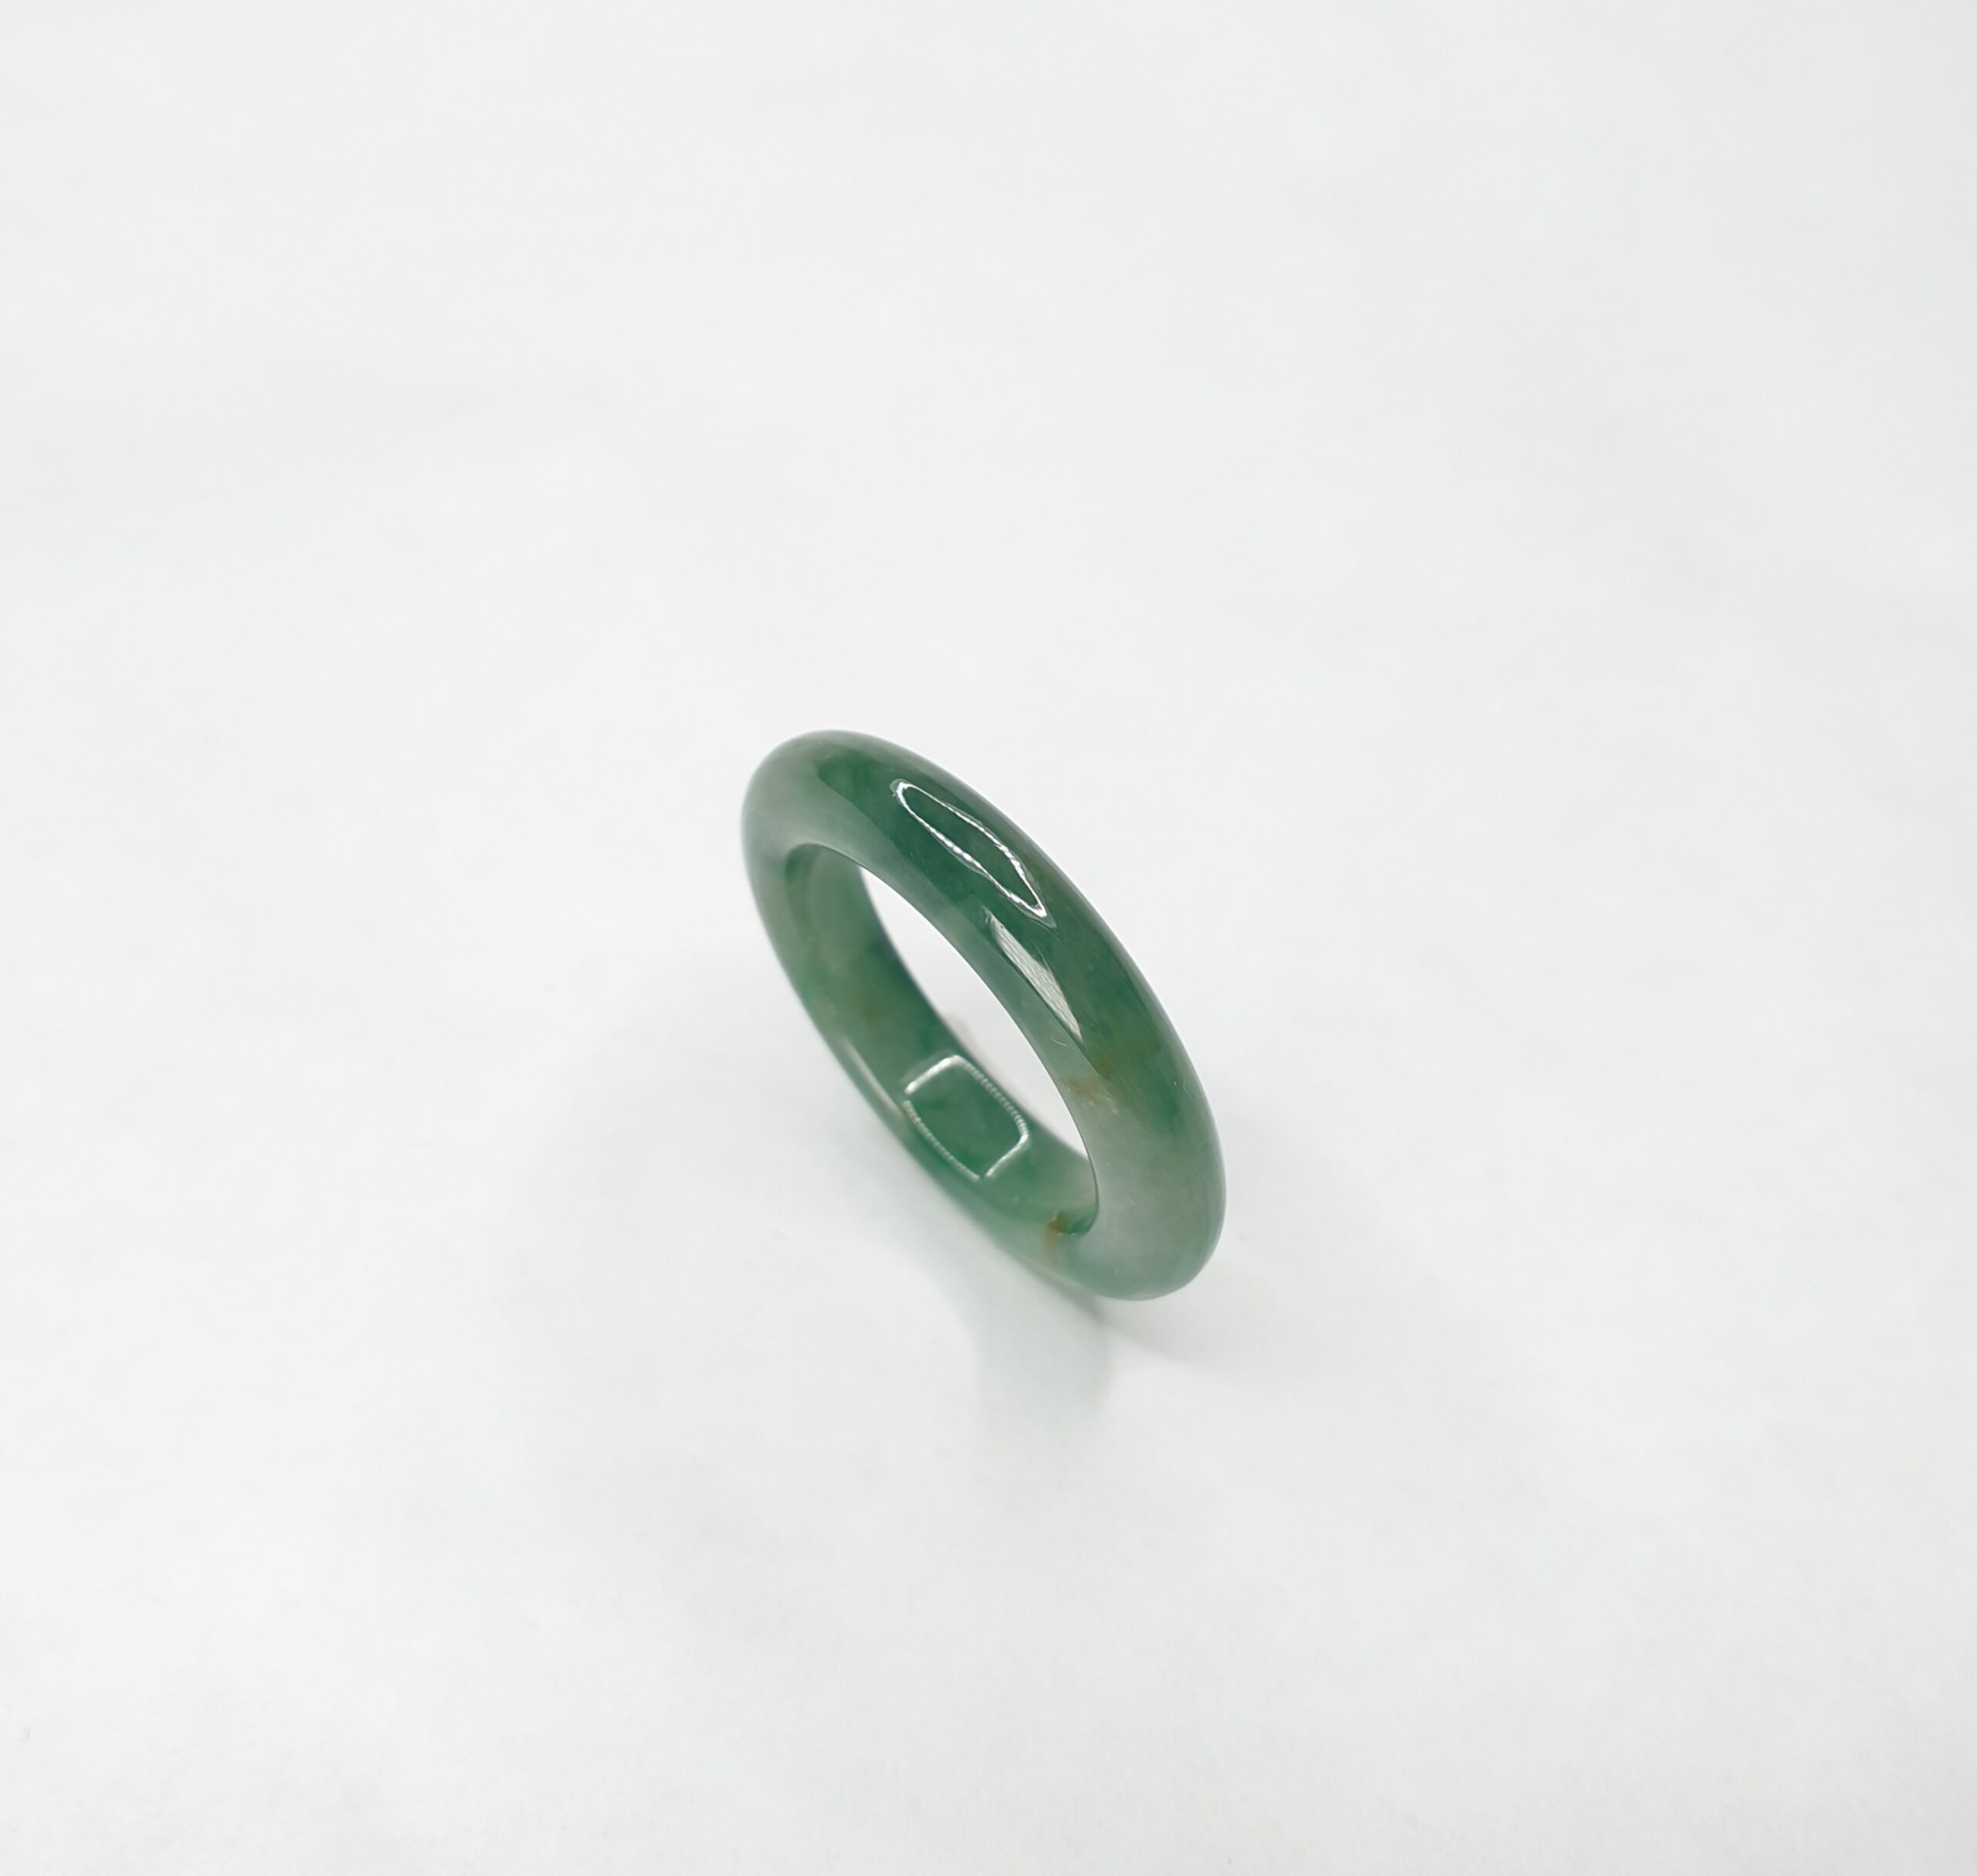 Buy Green Jade & Wood Wedding Band, Authentic Jade Wedding Band, Green Ring  for Groom Online in India - Etsy